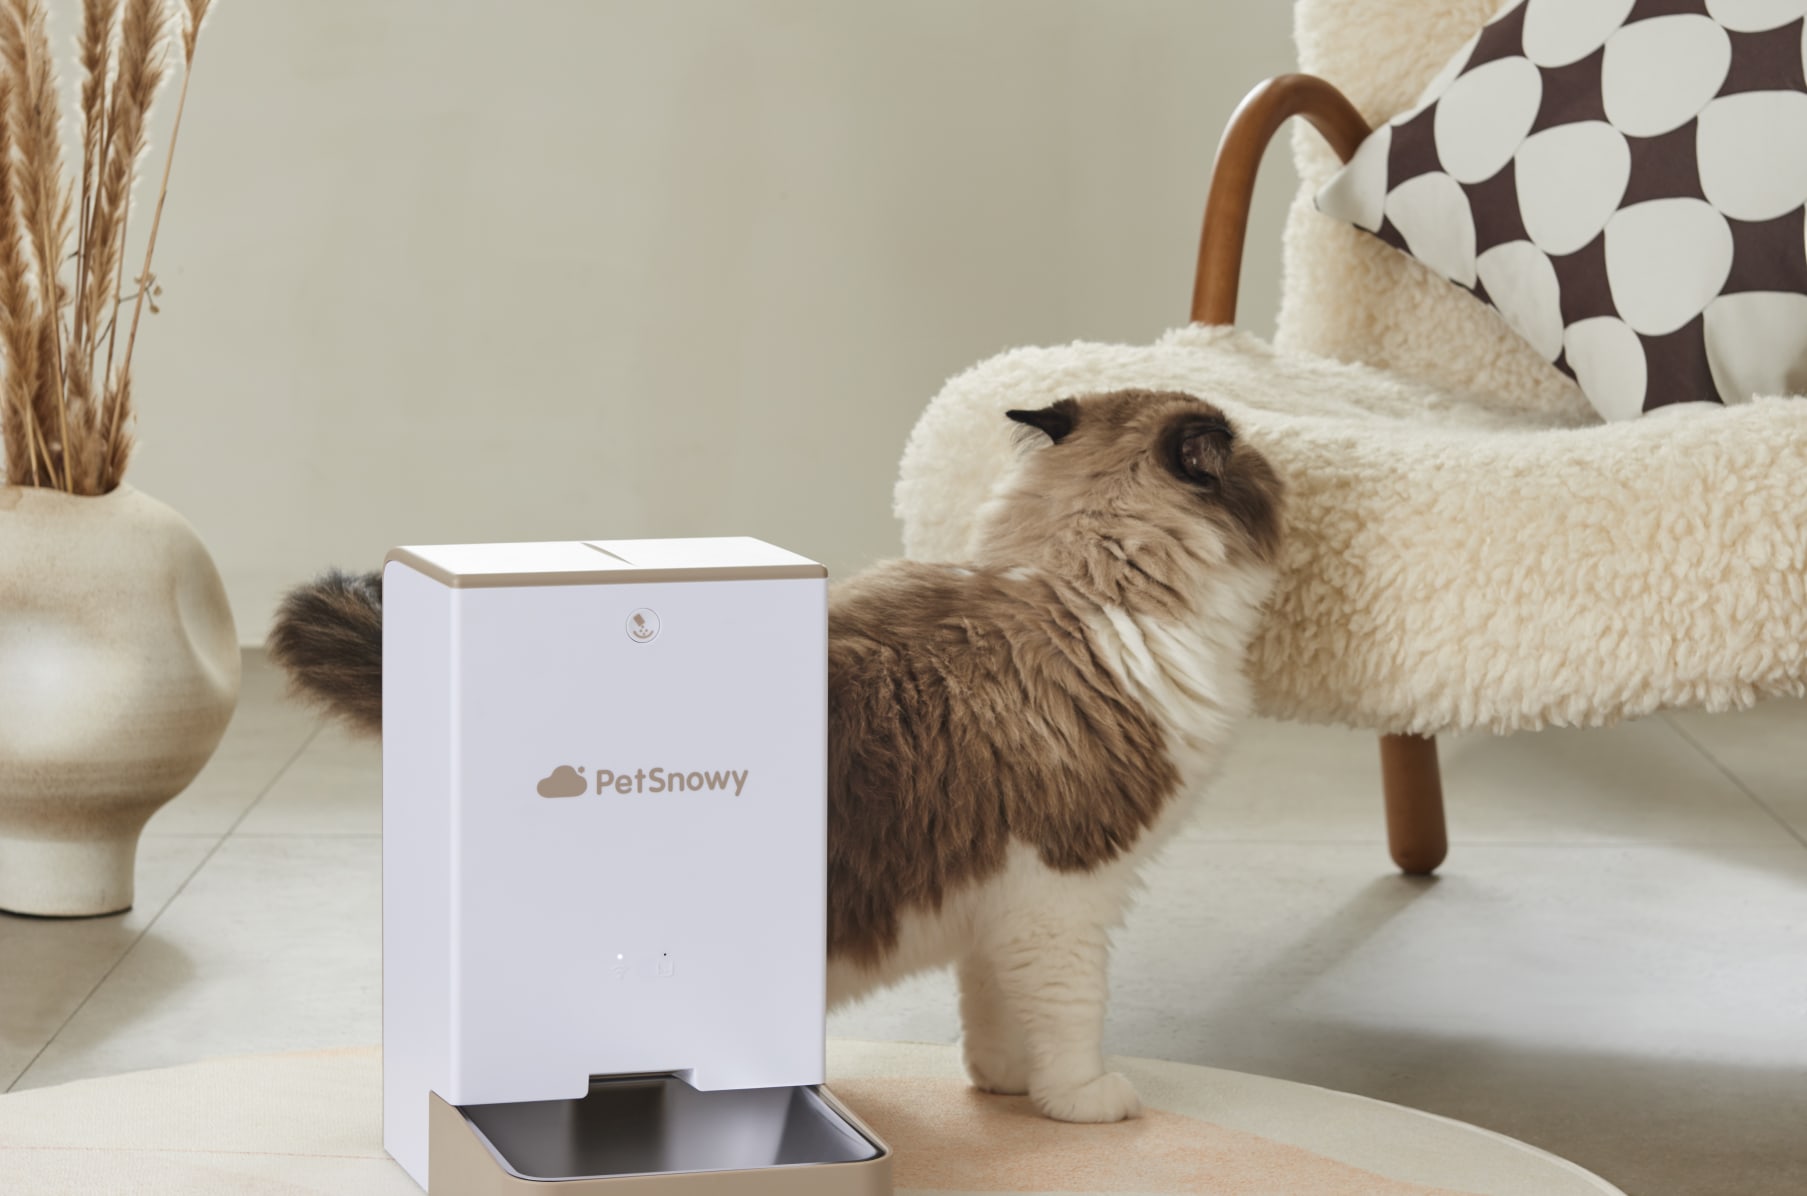 PetSnowy: The Innovative Self-Cleaning Litter Box | Indiegogo